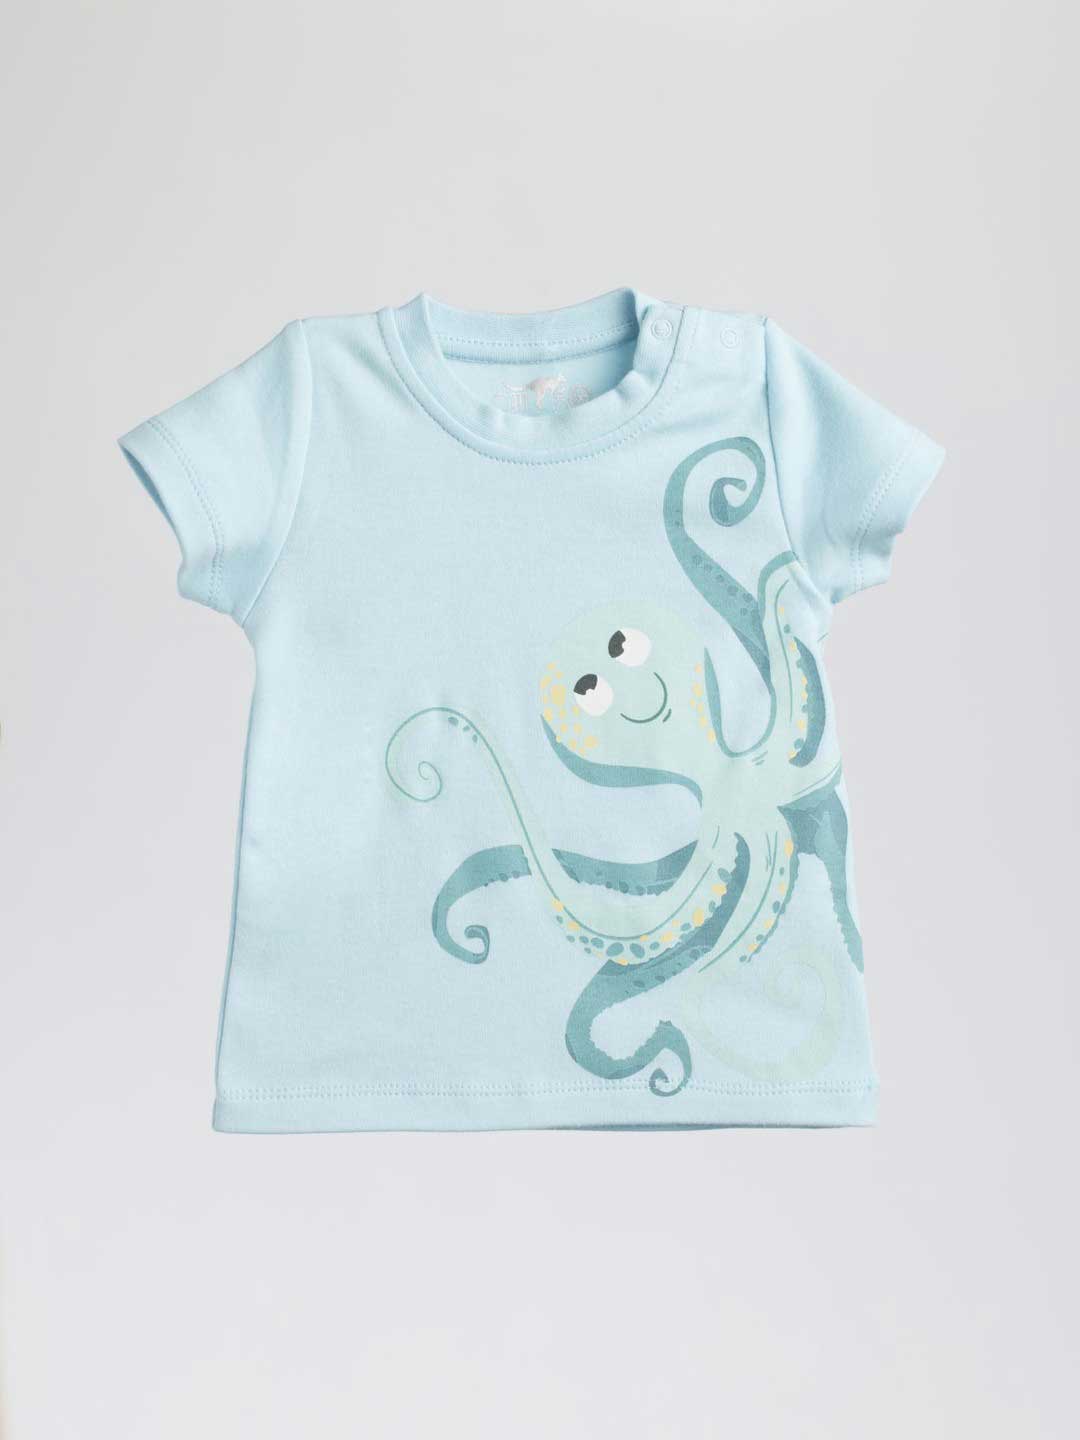 Baby T-shirt Sea Friends 343 is the perfect outfit for your baby's wardrobe. 